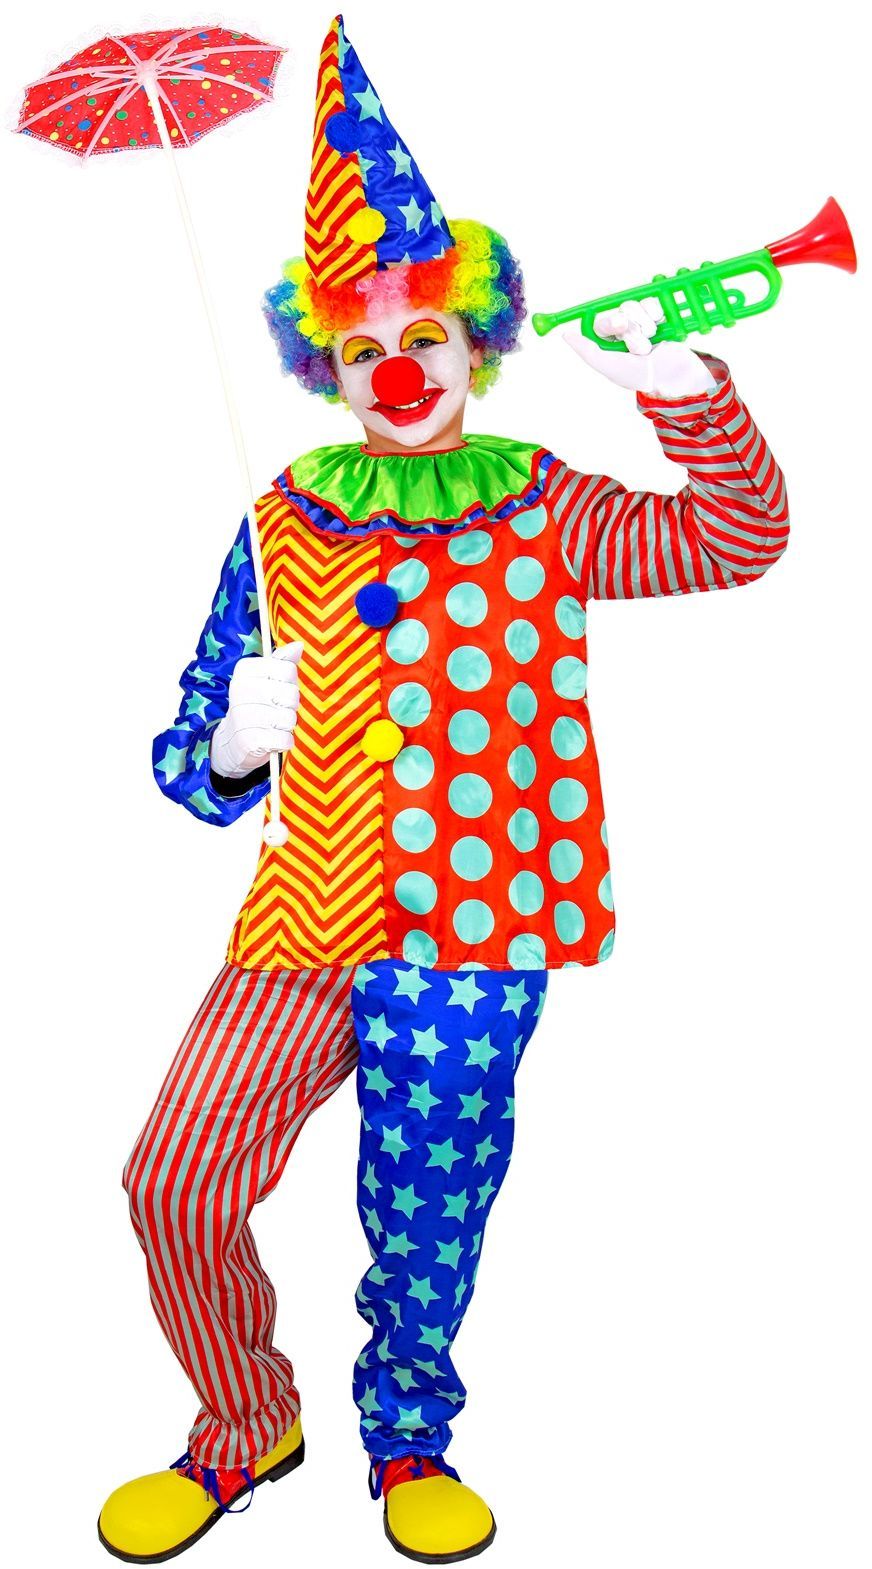 Circus clown outfit kind